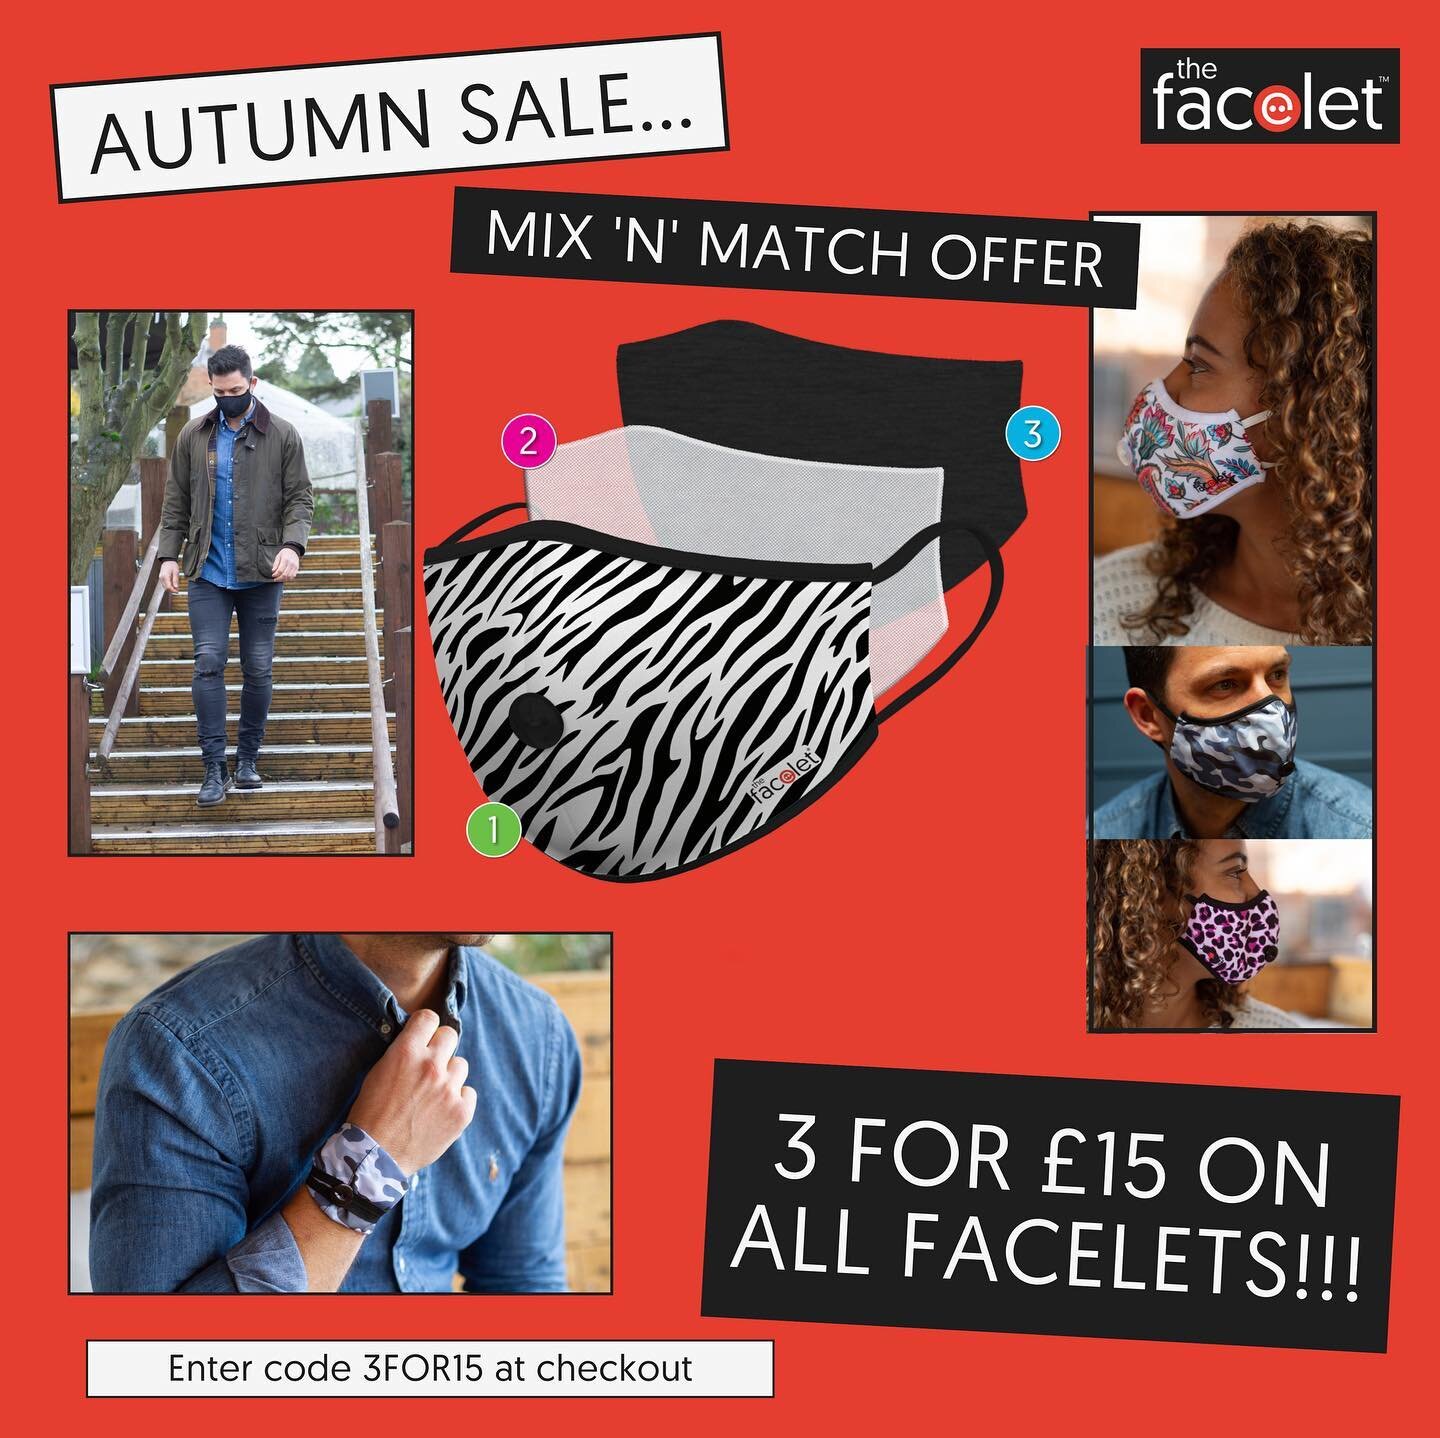 Whilst some measures on masks are lifting there are still occasions when we may want to or still have to wear a mask. #thefacelet is the only mask you can safely &amp; conveniently store on your wrist until you need it. #AutumnSale All facelets avail